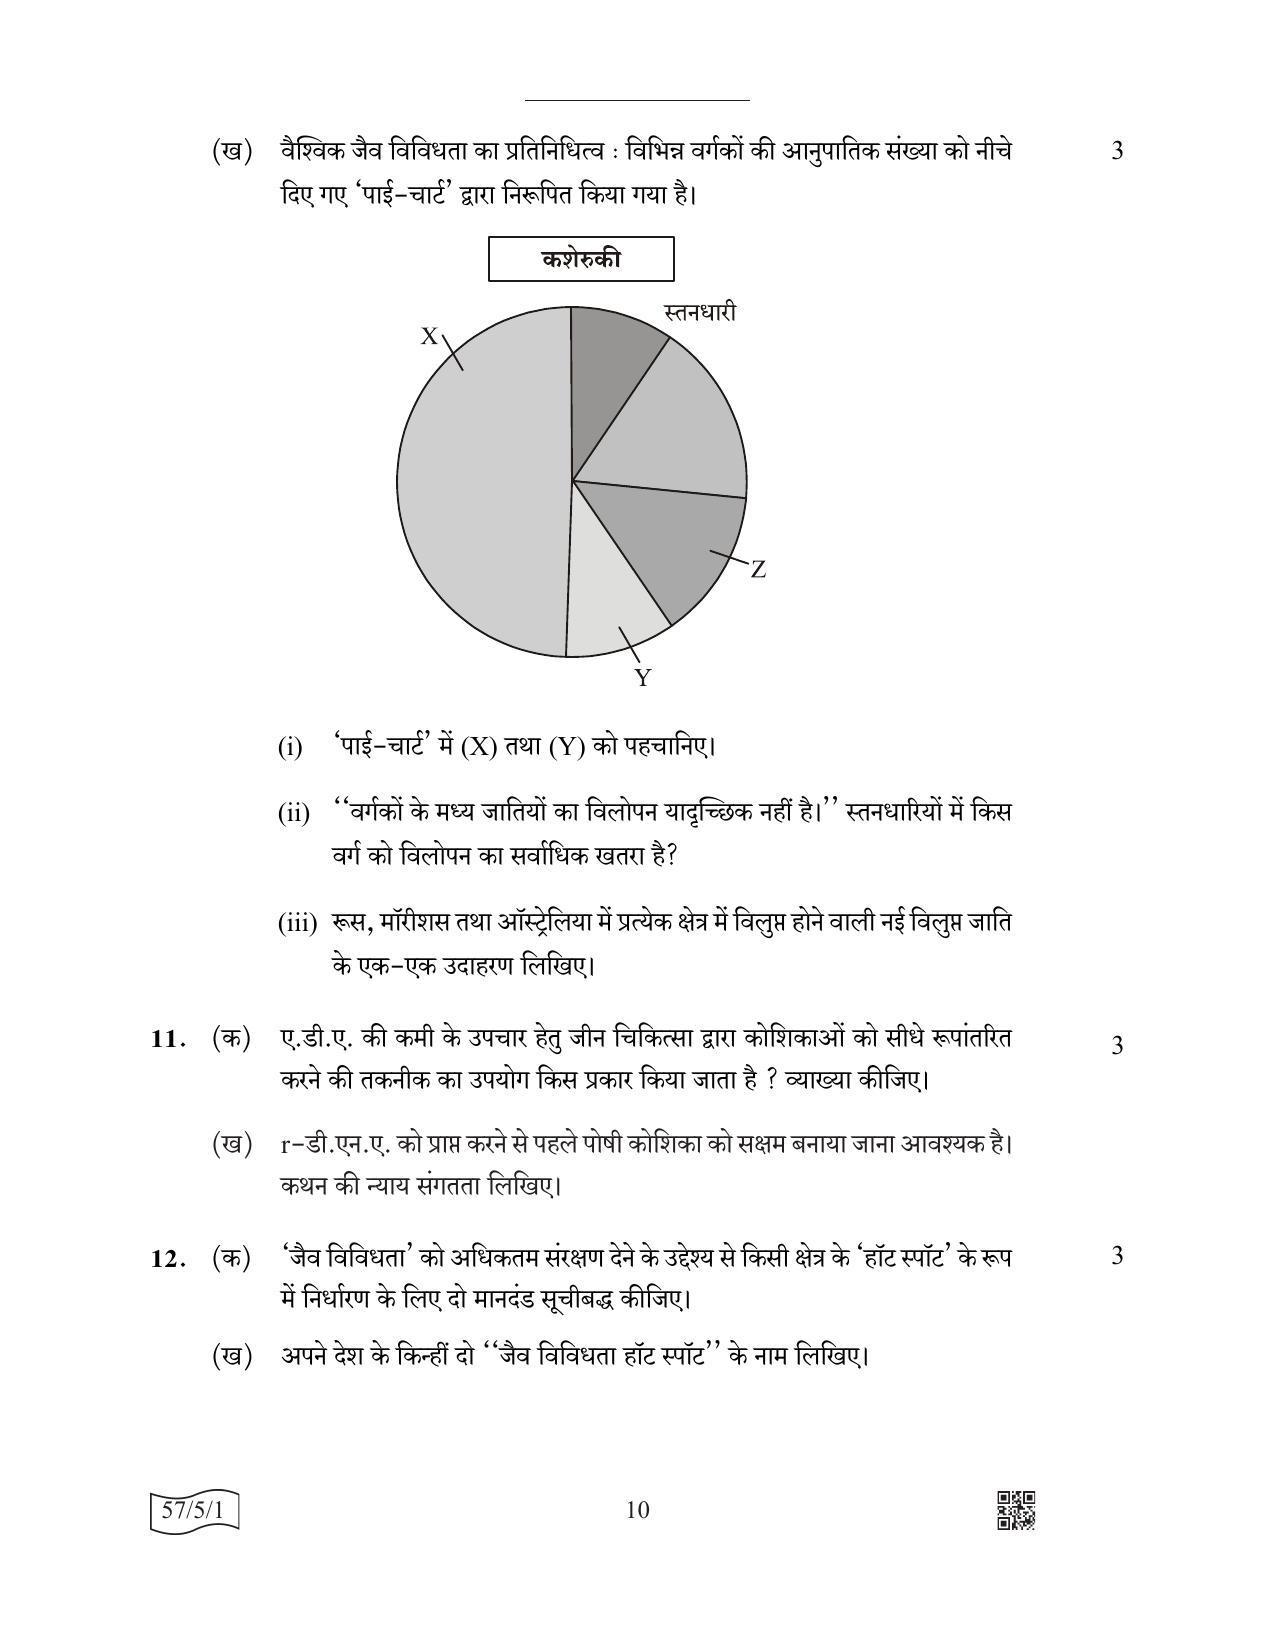 CBSE Class 12 57-5-1 Biology 2022 Question Paper - Page 10